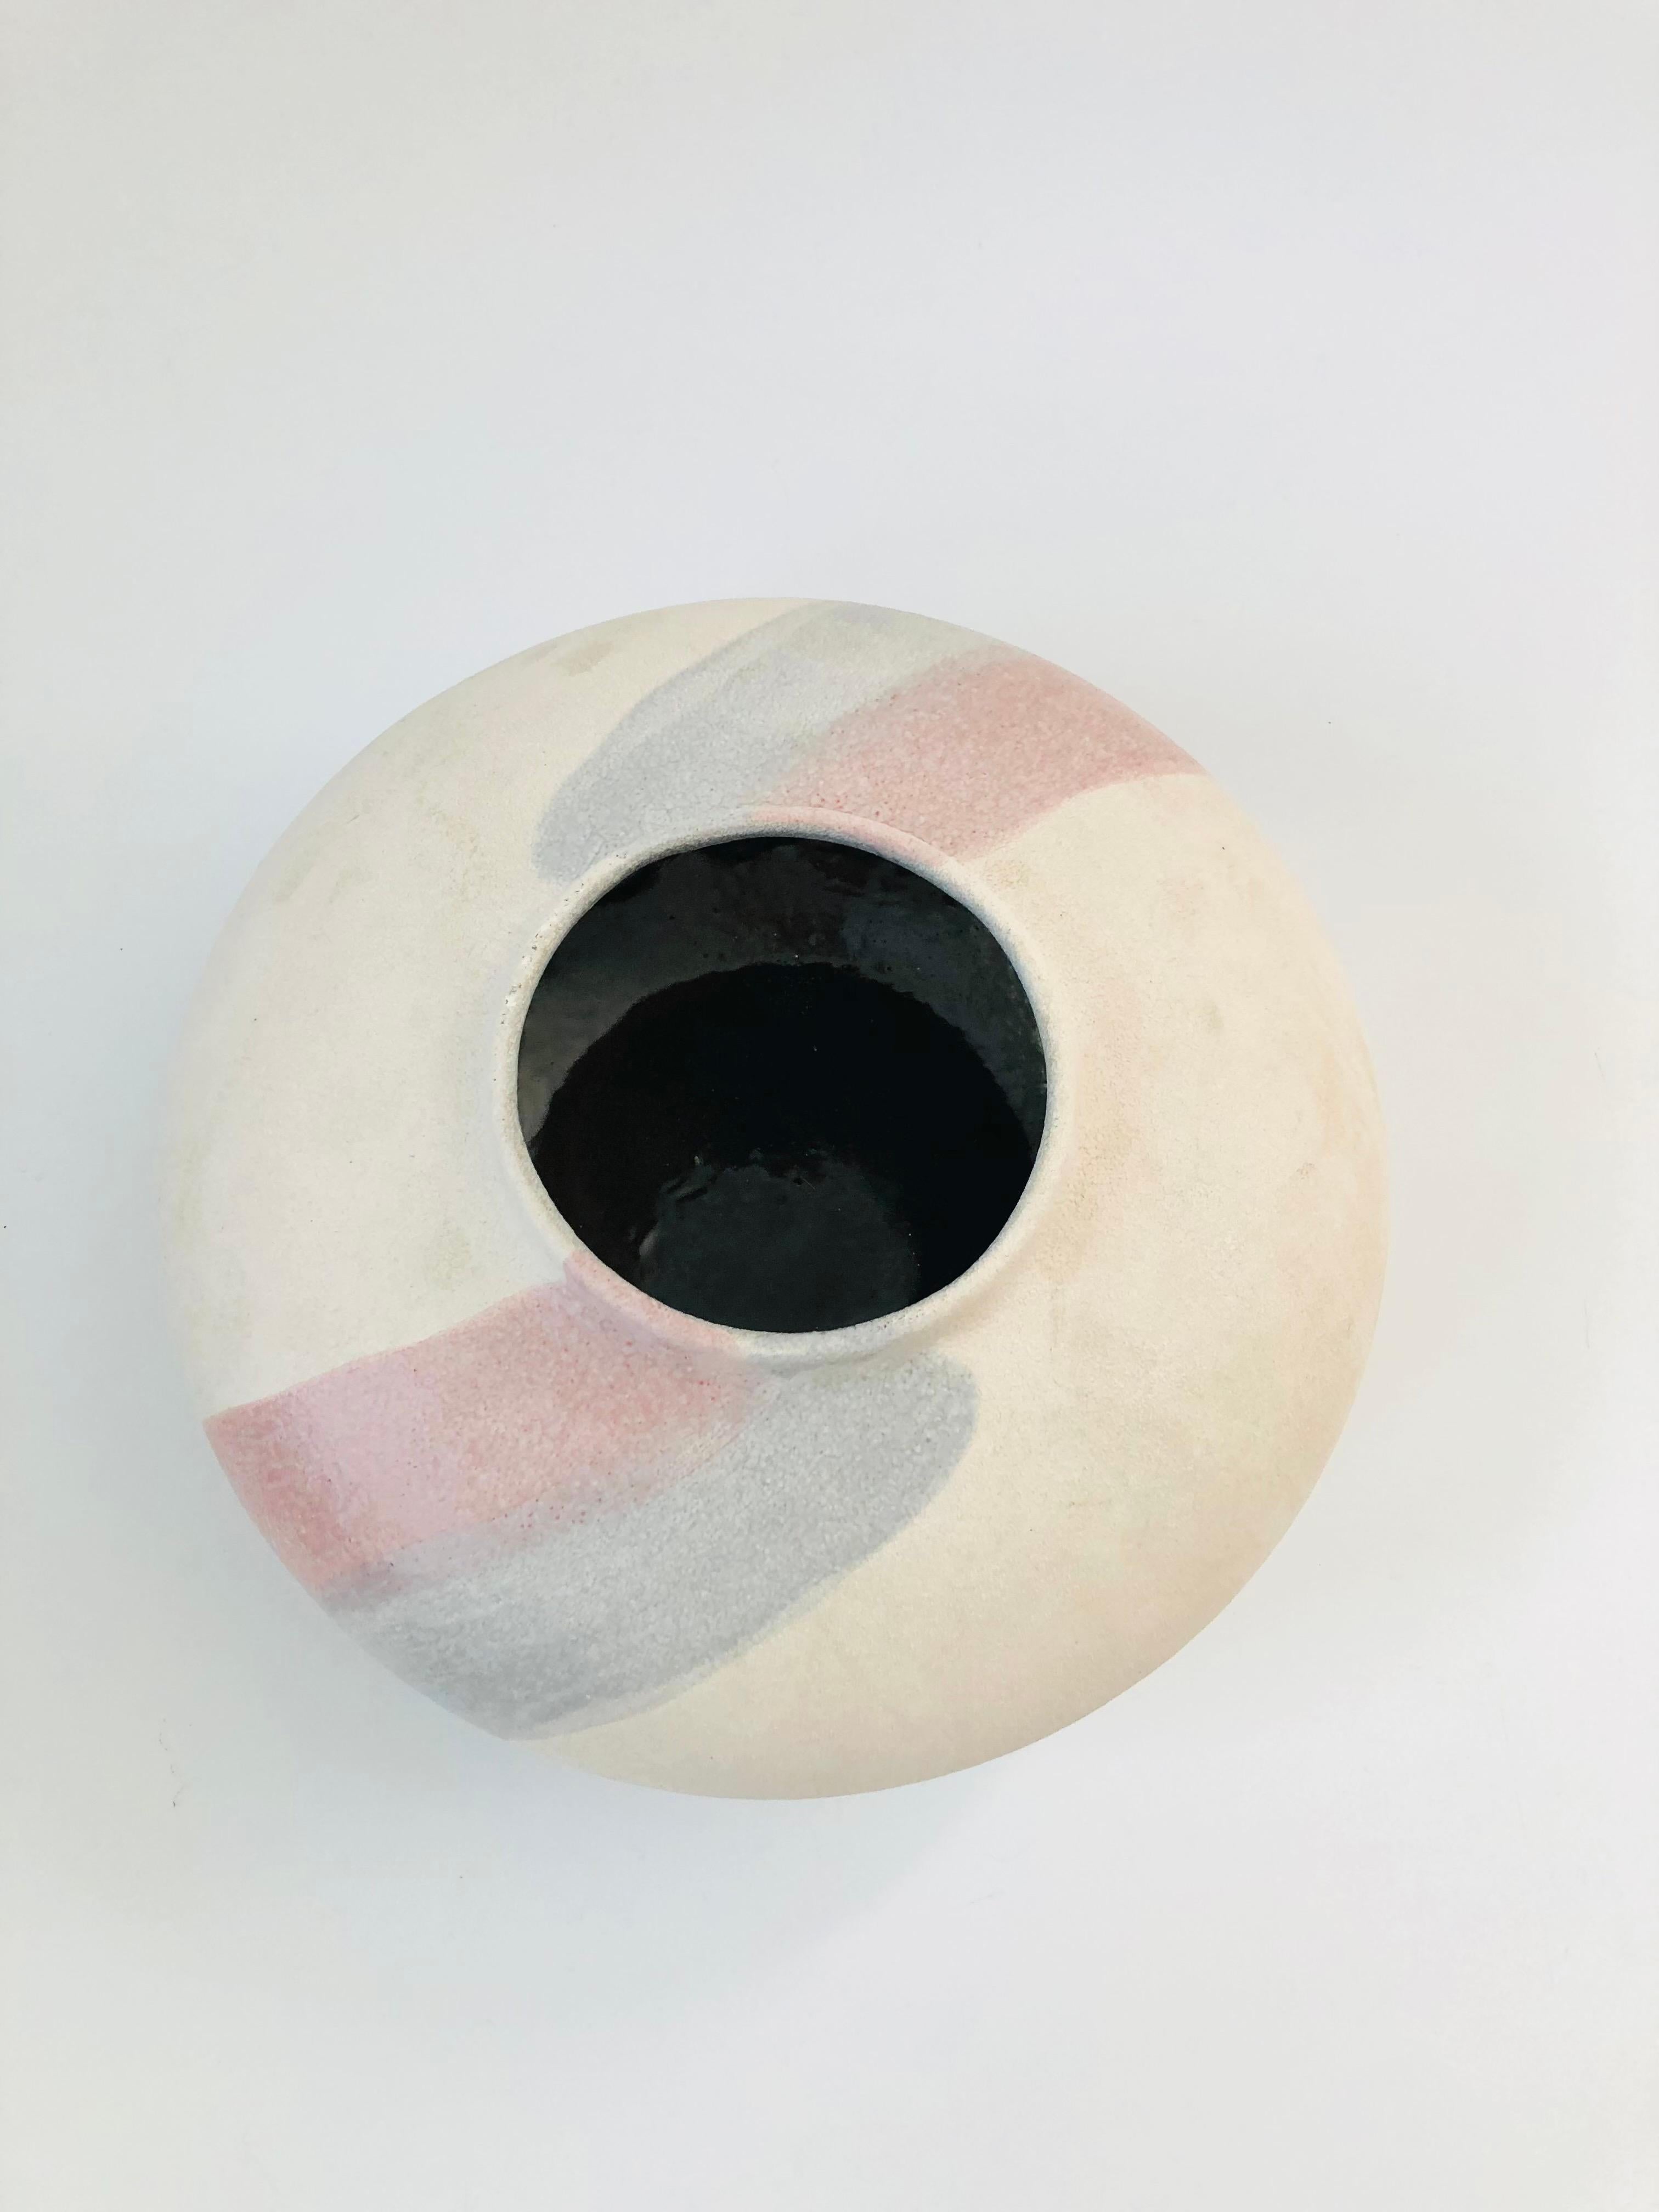 A large vintage 1980s potter vase. Nice flat circular shape with textured finish to the pottery. Two painted stripes of pink and blue decorate the surface. The interior has a glossy black finish. Perfect for creating a sculptural floral arrangement.